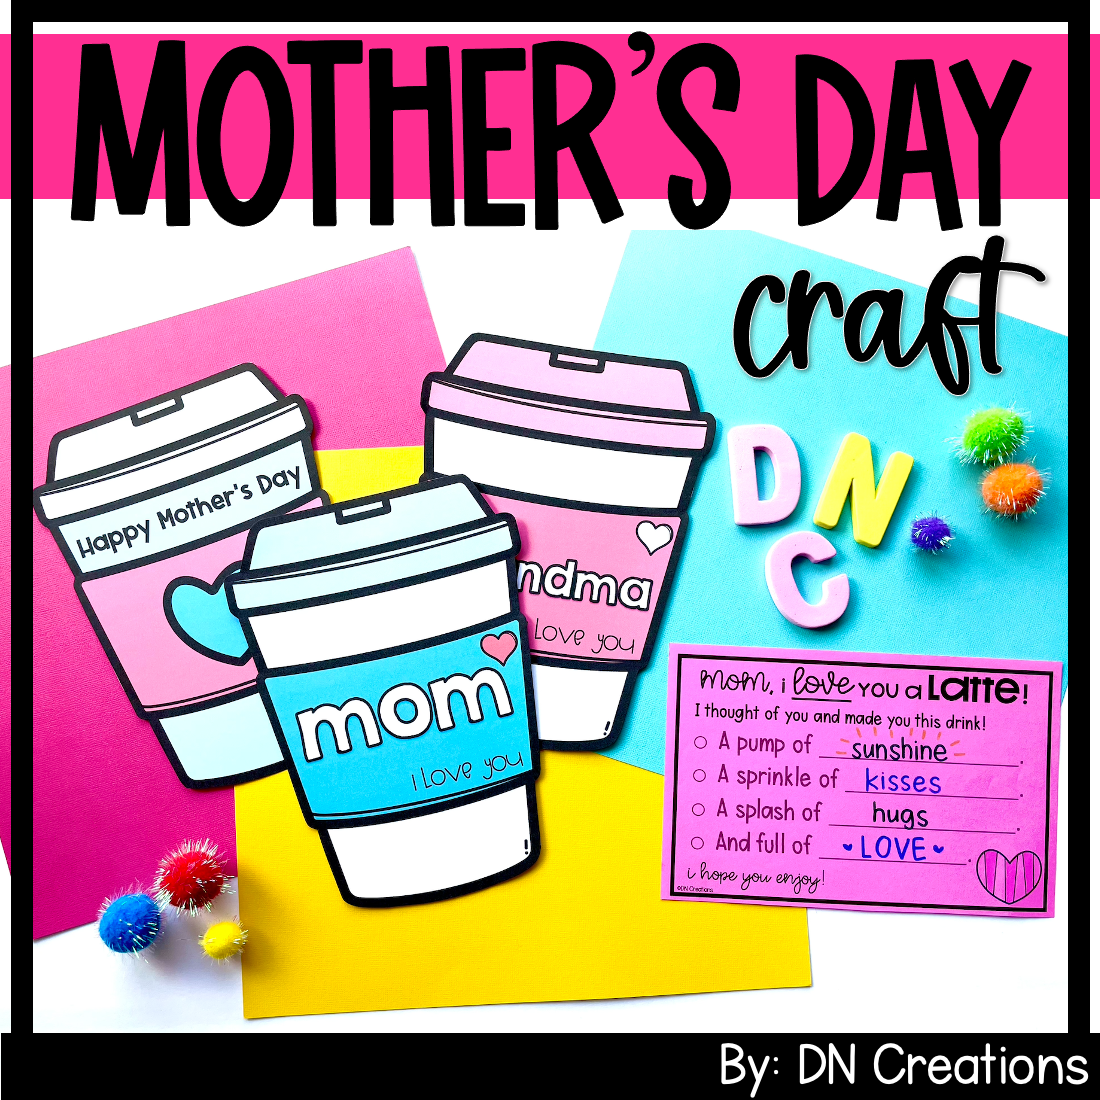 Mother's Day Craft and Card l I Love You a Latte Craft l Valentine for Mom